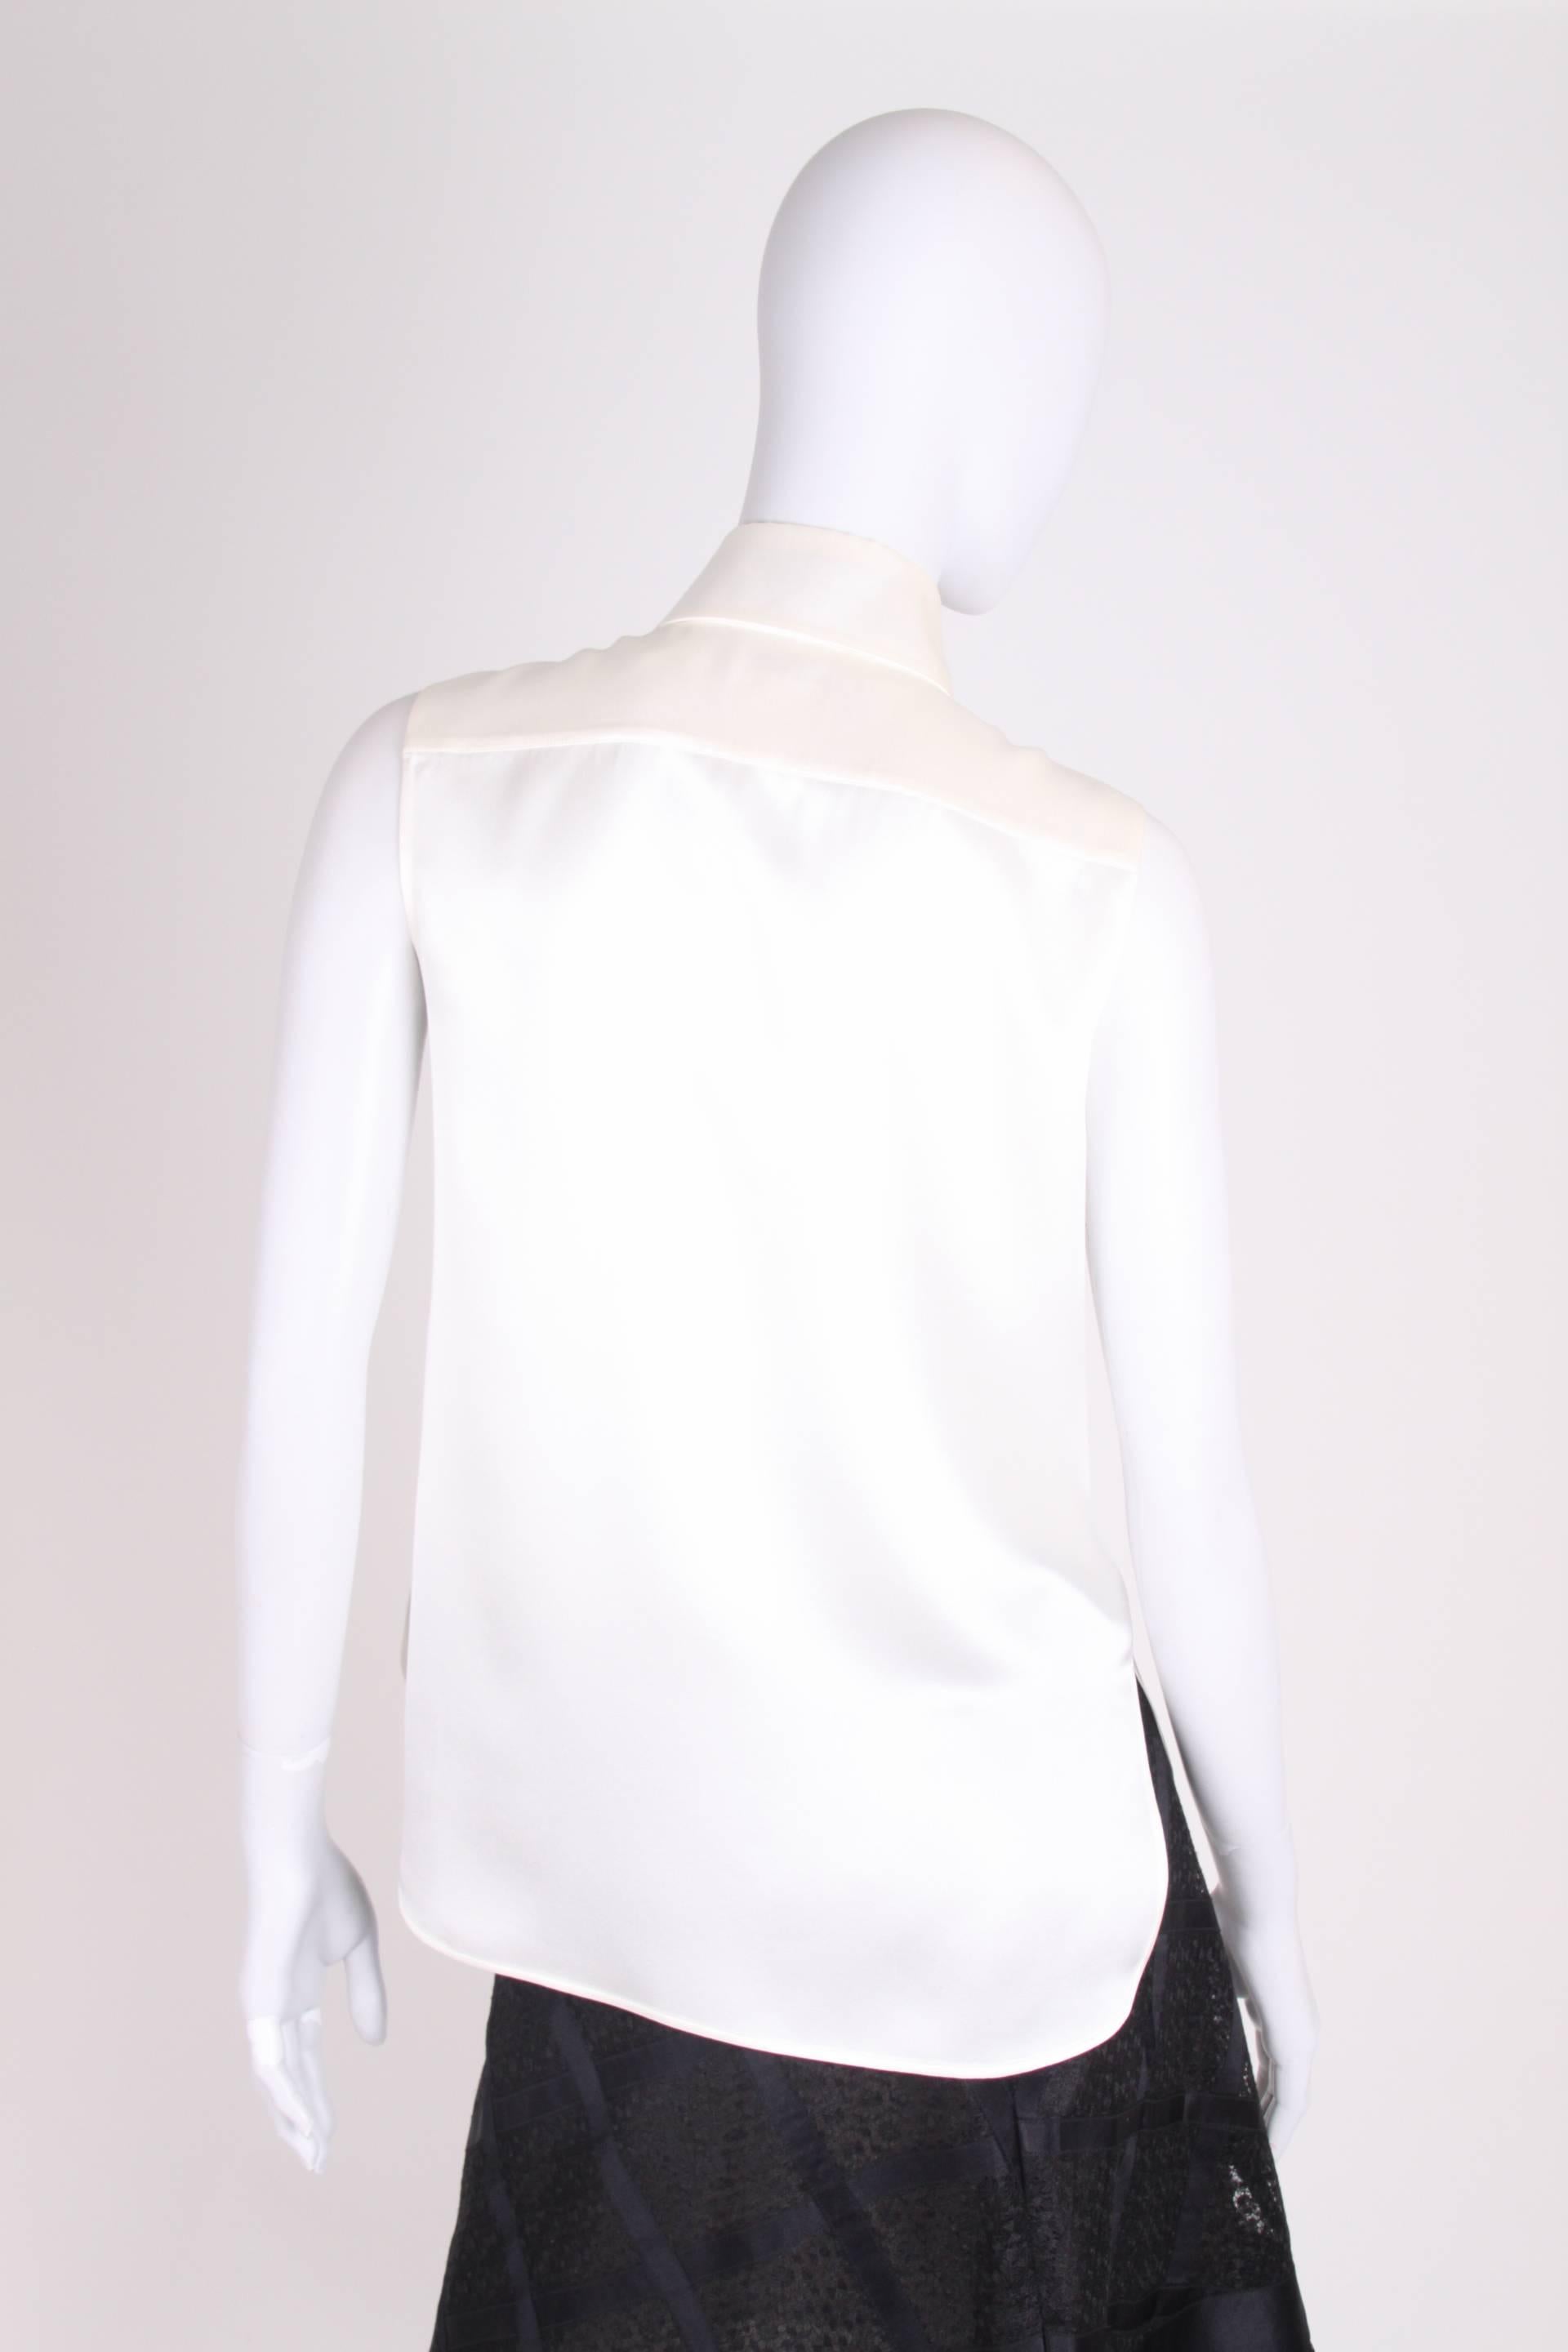 Elegant sleeveless blouse by Chanel, very presentable!

This blouse has button closure at the front; five white buttons with a CC-logo. Two large patch pockets on the chest and a rather large collar with a wide black ribbon that can be tied into a